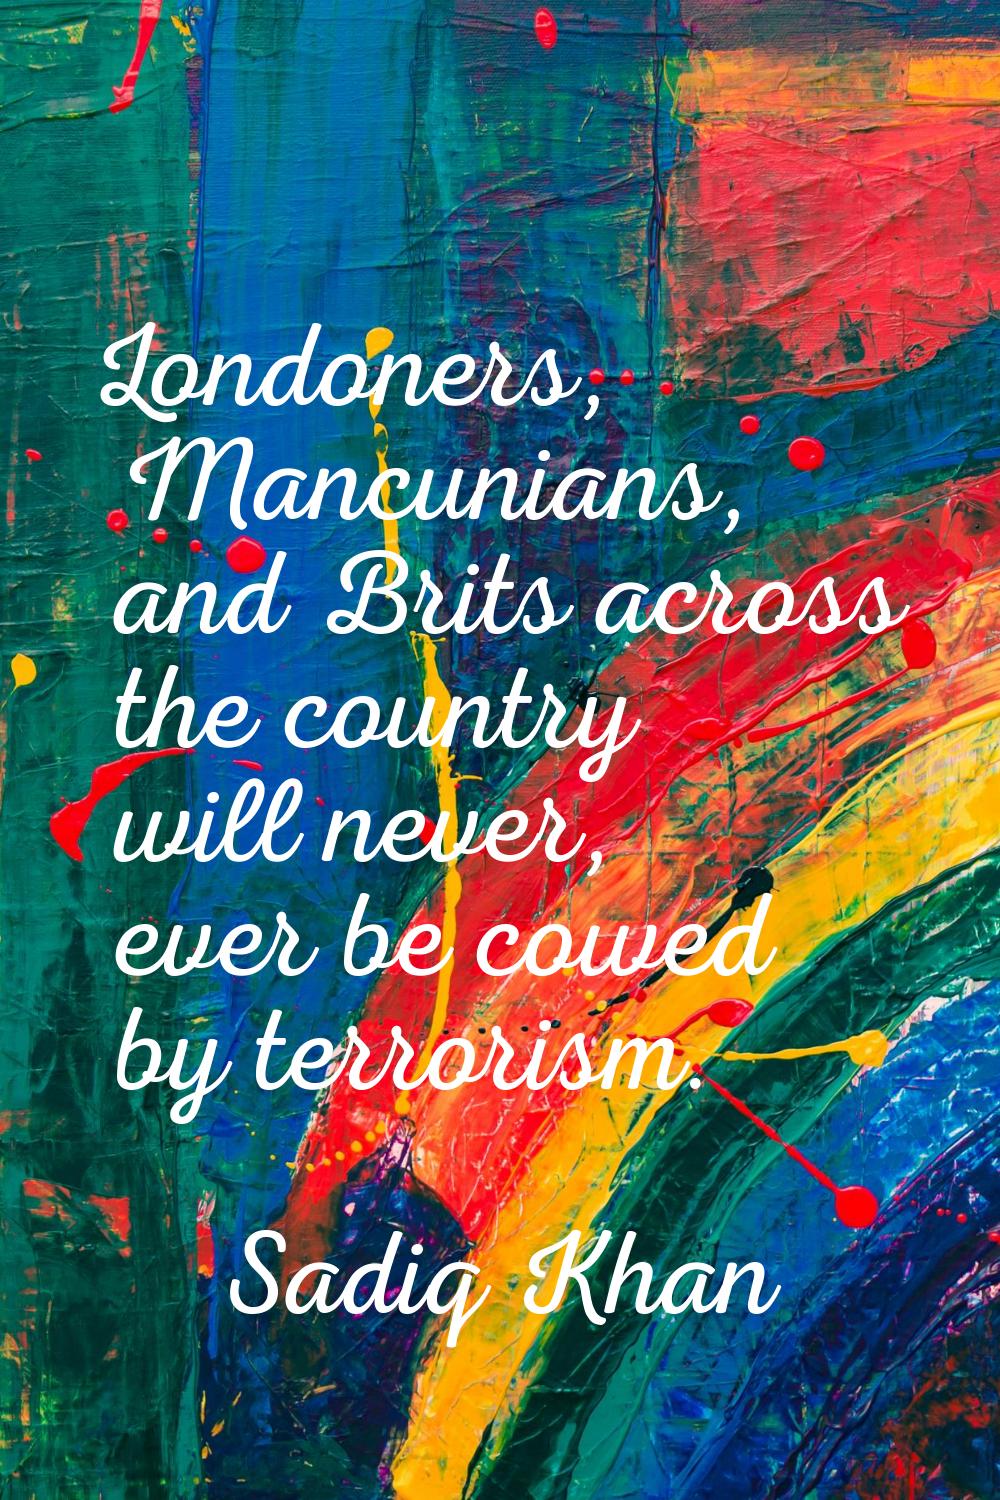 Londoners, Mancunians, and Brits across the country will never, ever be cowed by terrorism.